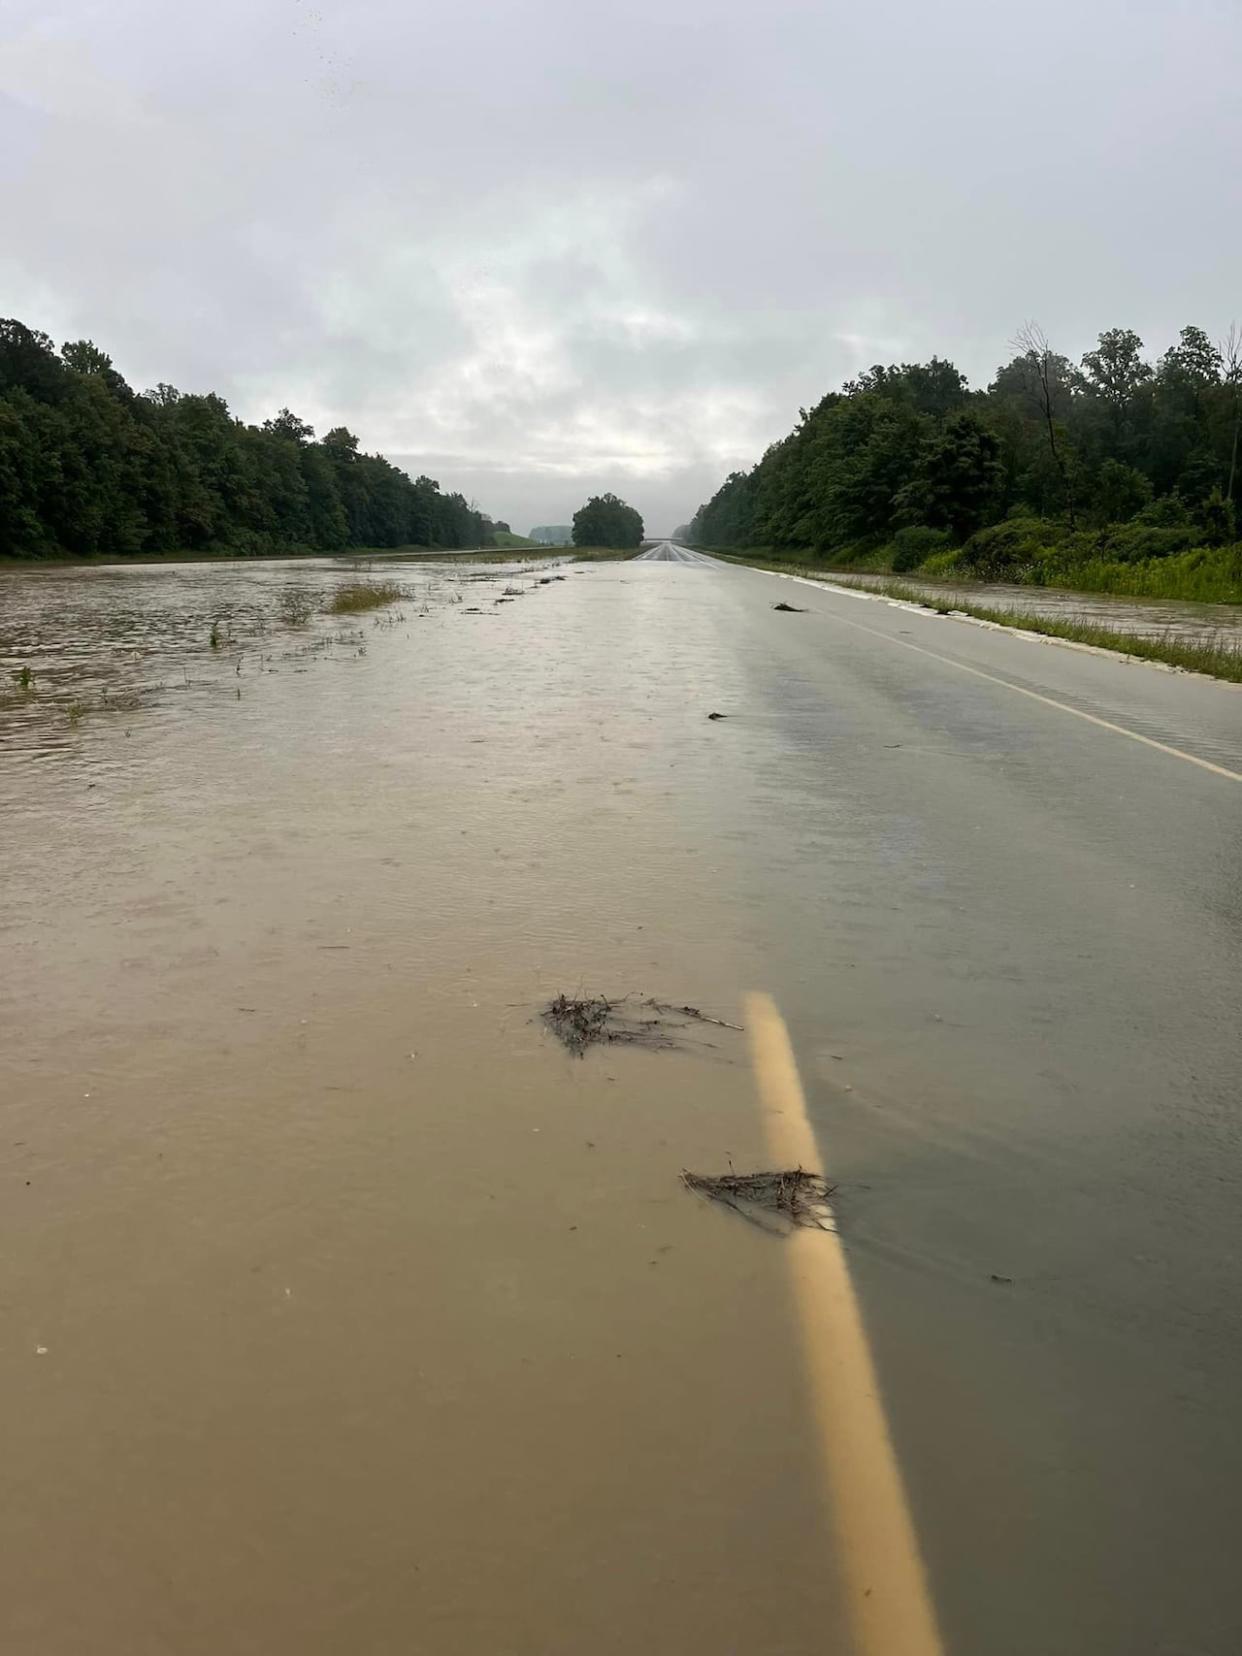 Ontario Provincial Police closed Highway 402, between exit 44 and exit 52, for more than 12 hours starting Wednesday evening due to flash flooding.  (Township of Warwick Fire & Rescue Department - image credit)